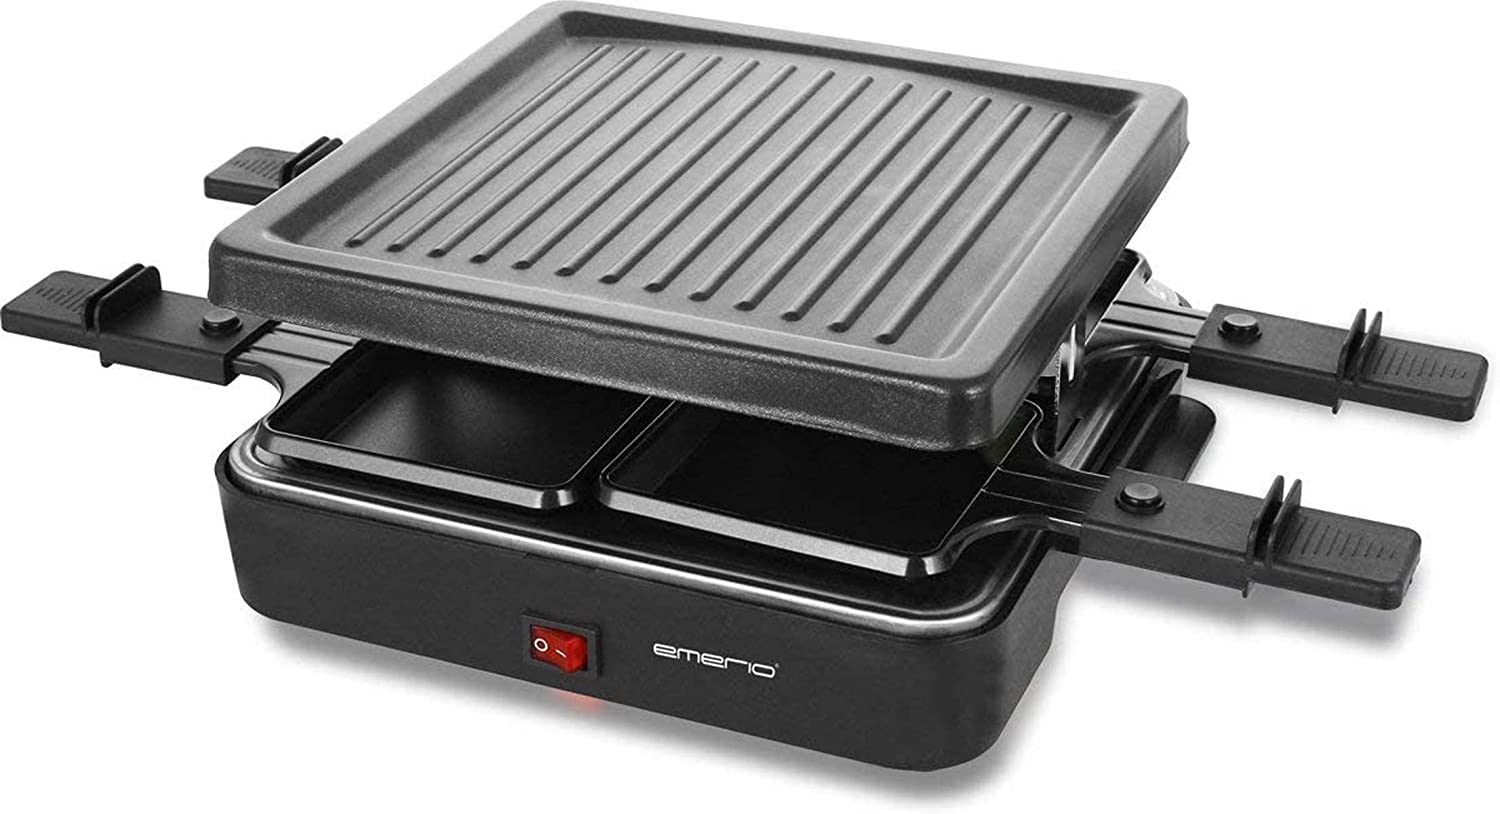 EMERIO RG-1220656 Raclette with Grill Plate for 4 People 600 watts